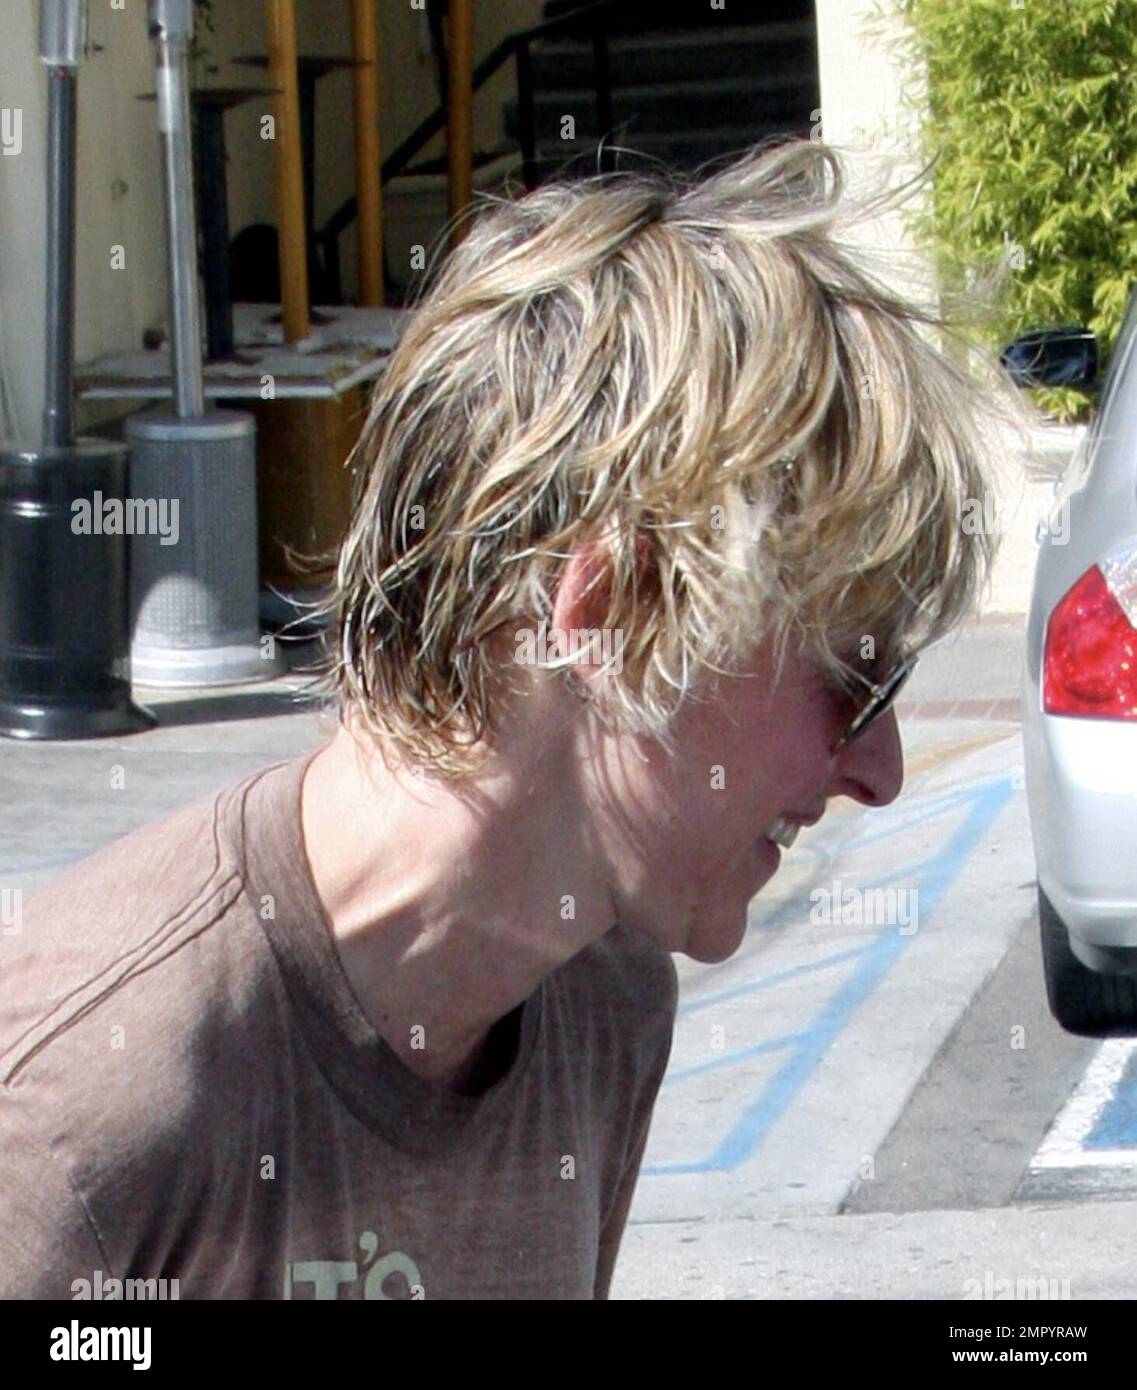 Looks like Ellen DeGeneres is having a bad hair day. The actress turned  chat show host was caught after brunch with serious bed head hair. Ellen  has recently bought a company called